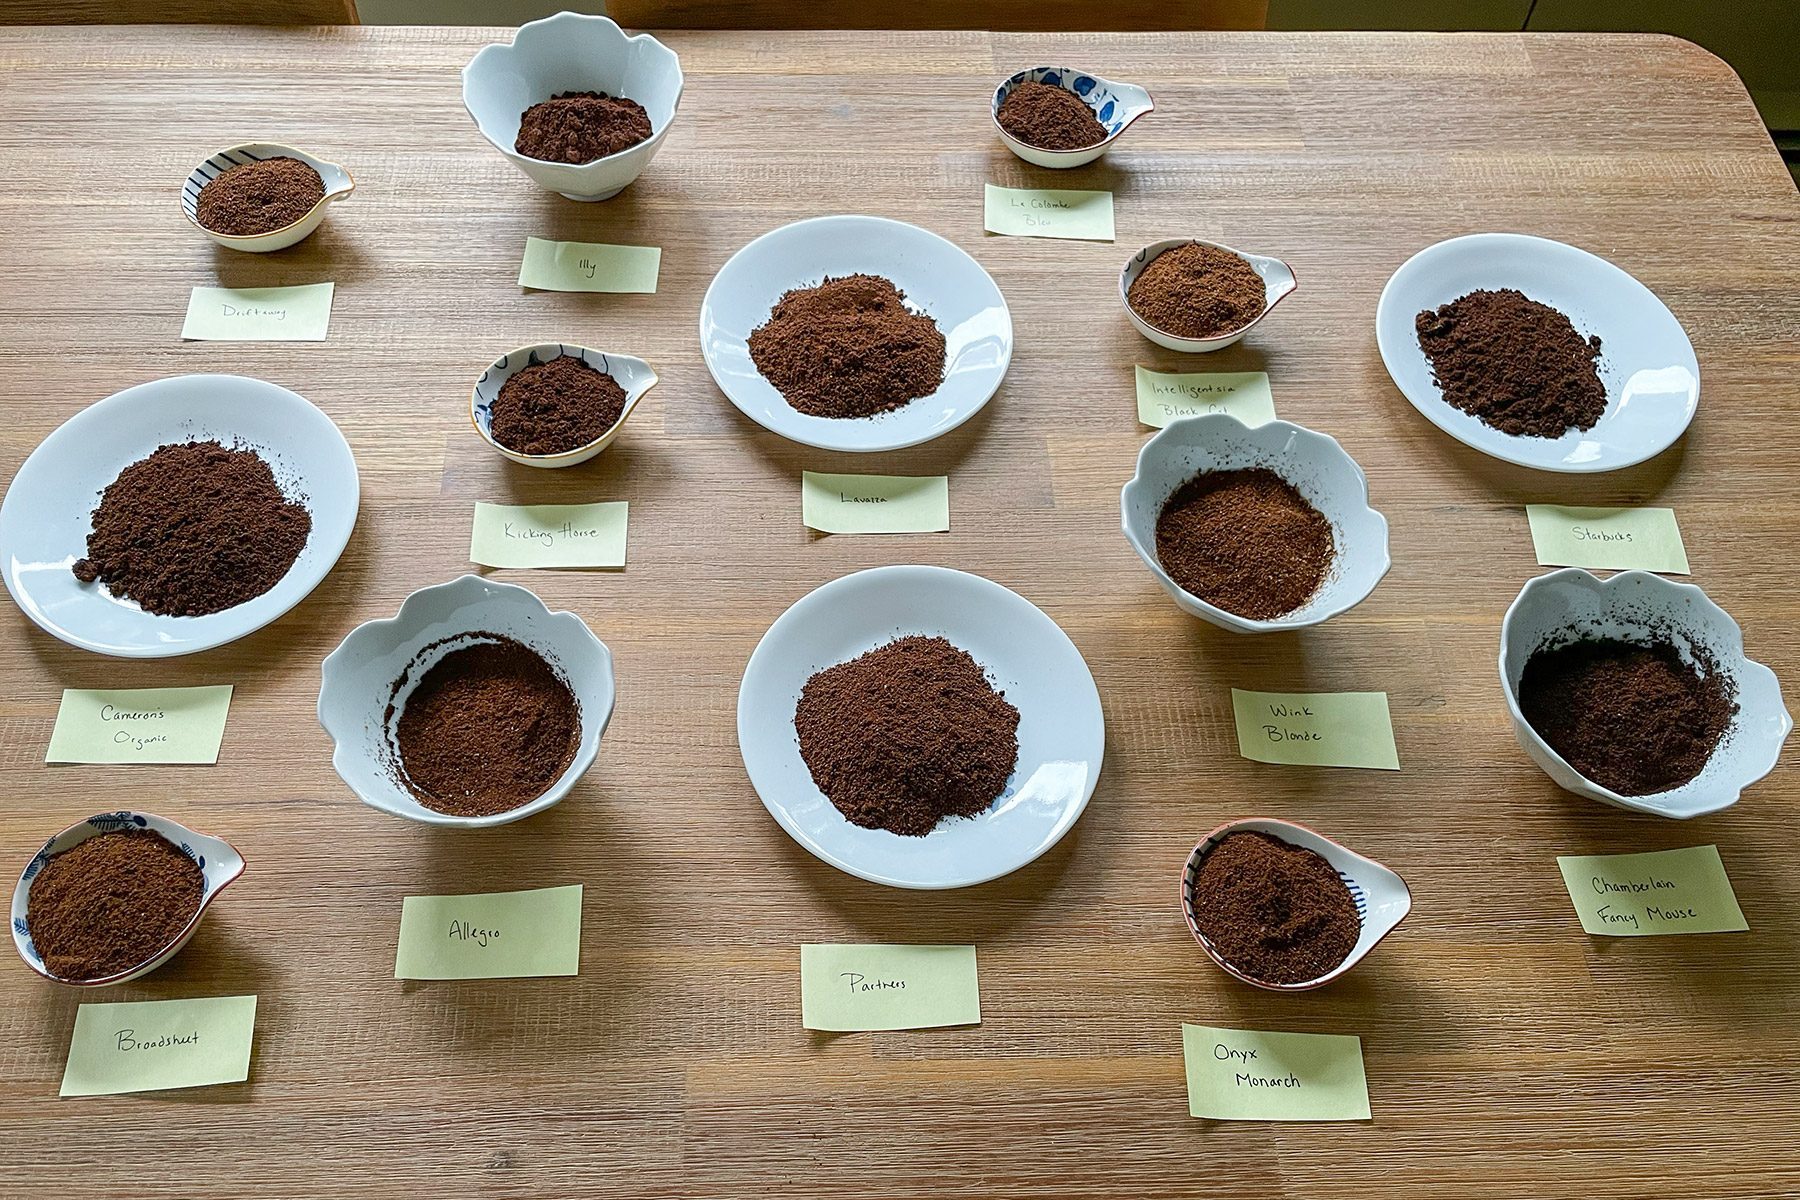 Different Coffee Grounds in small bowls on wooden table with labels in front of them